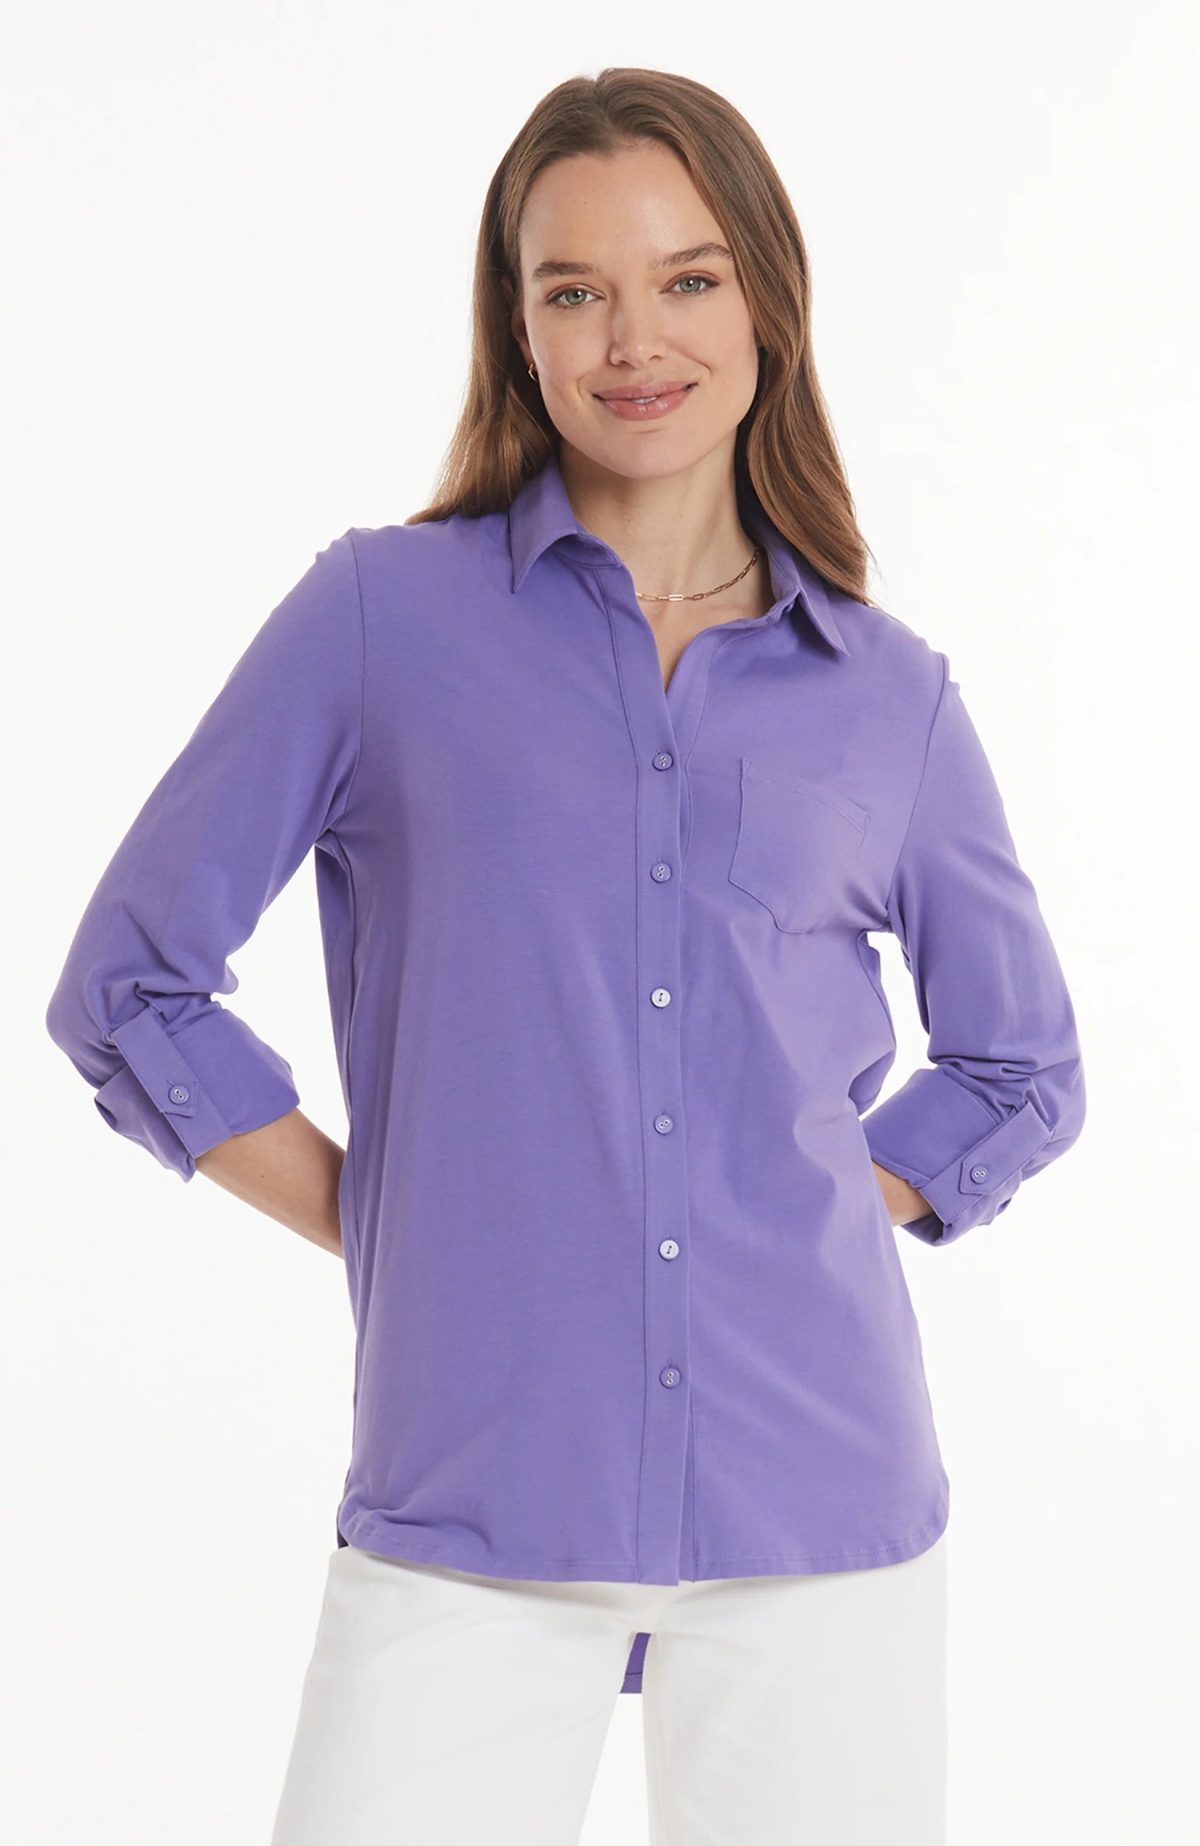 Tyler Boe 12012 Crocus Button Down Front Patti Roll Sleeve Polo | Ooh Ooh Shoes women's clothing and shoe boutique located in Naples and Mashpee